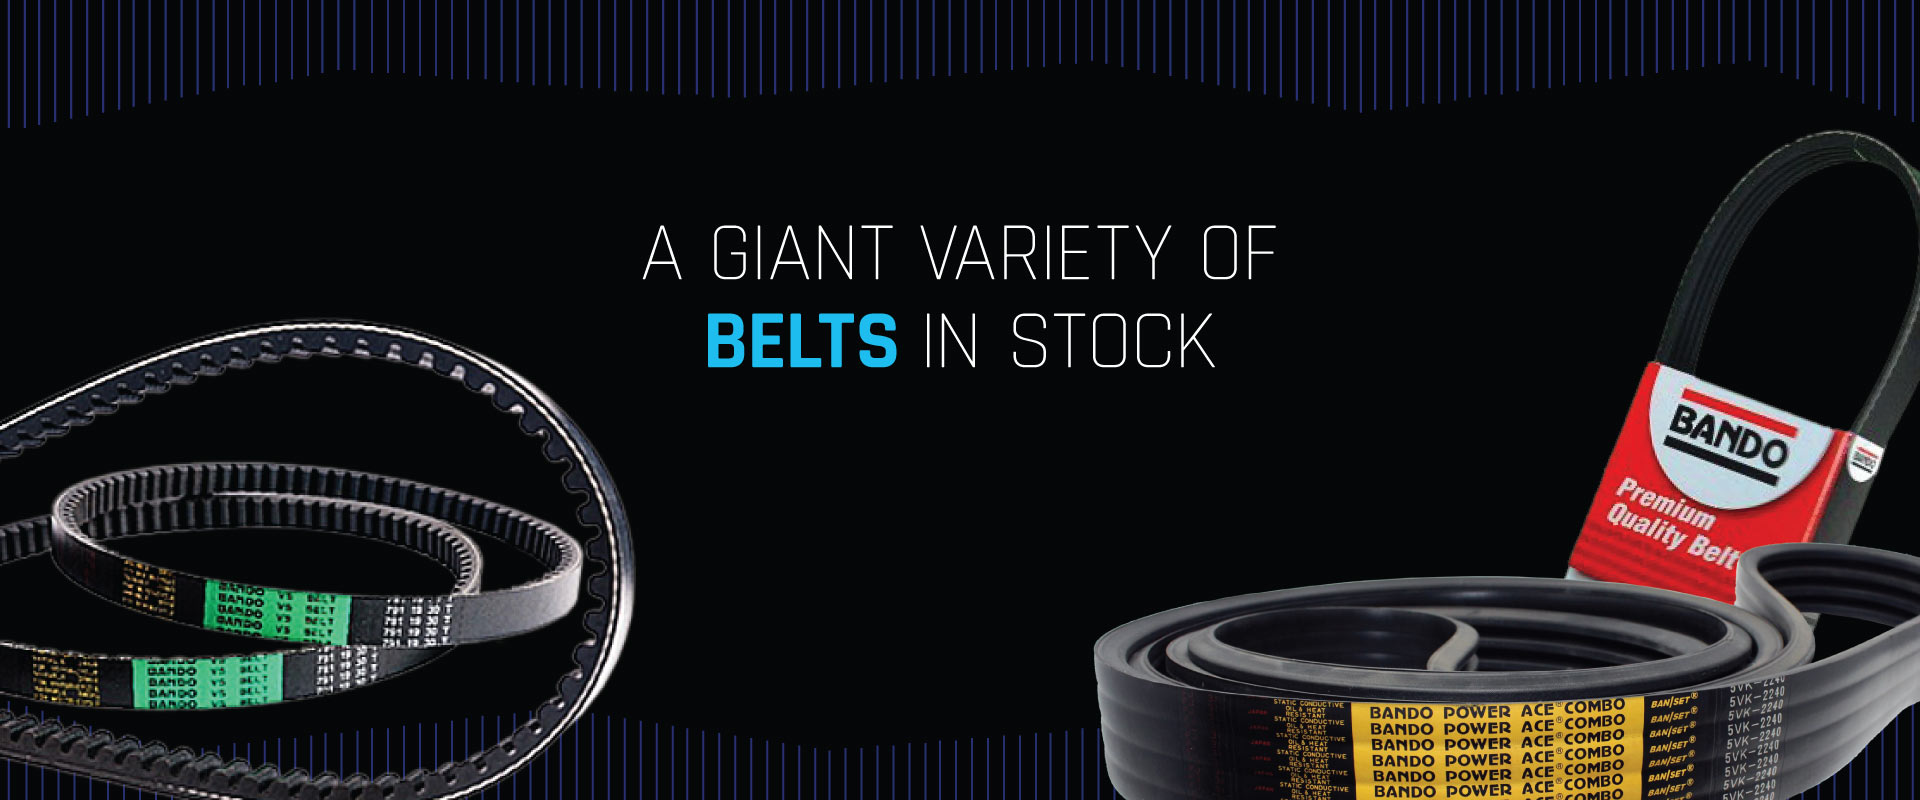 Giant supply of belts